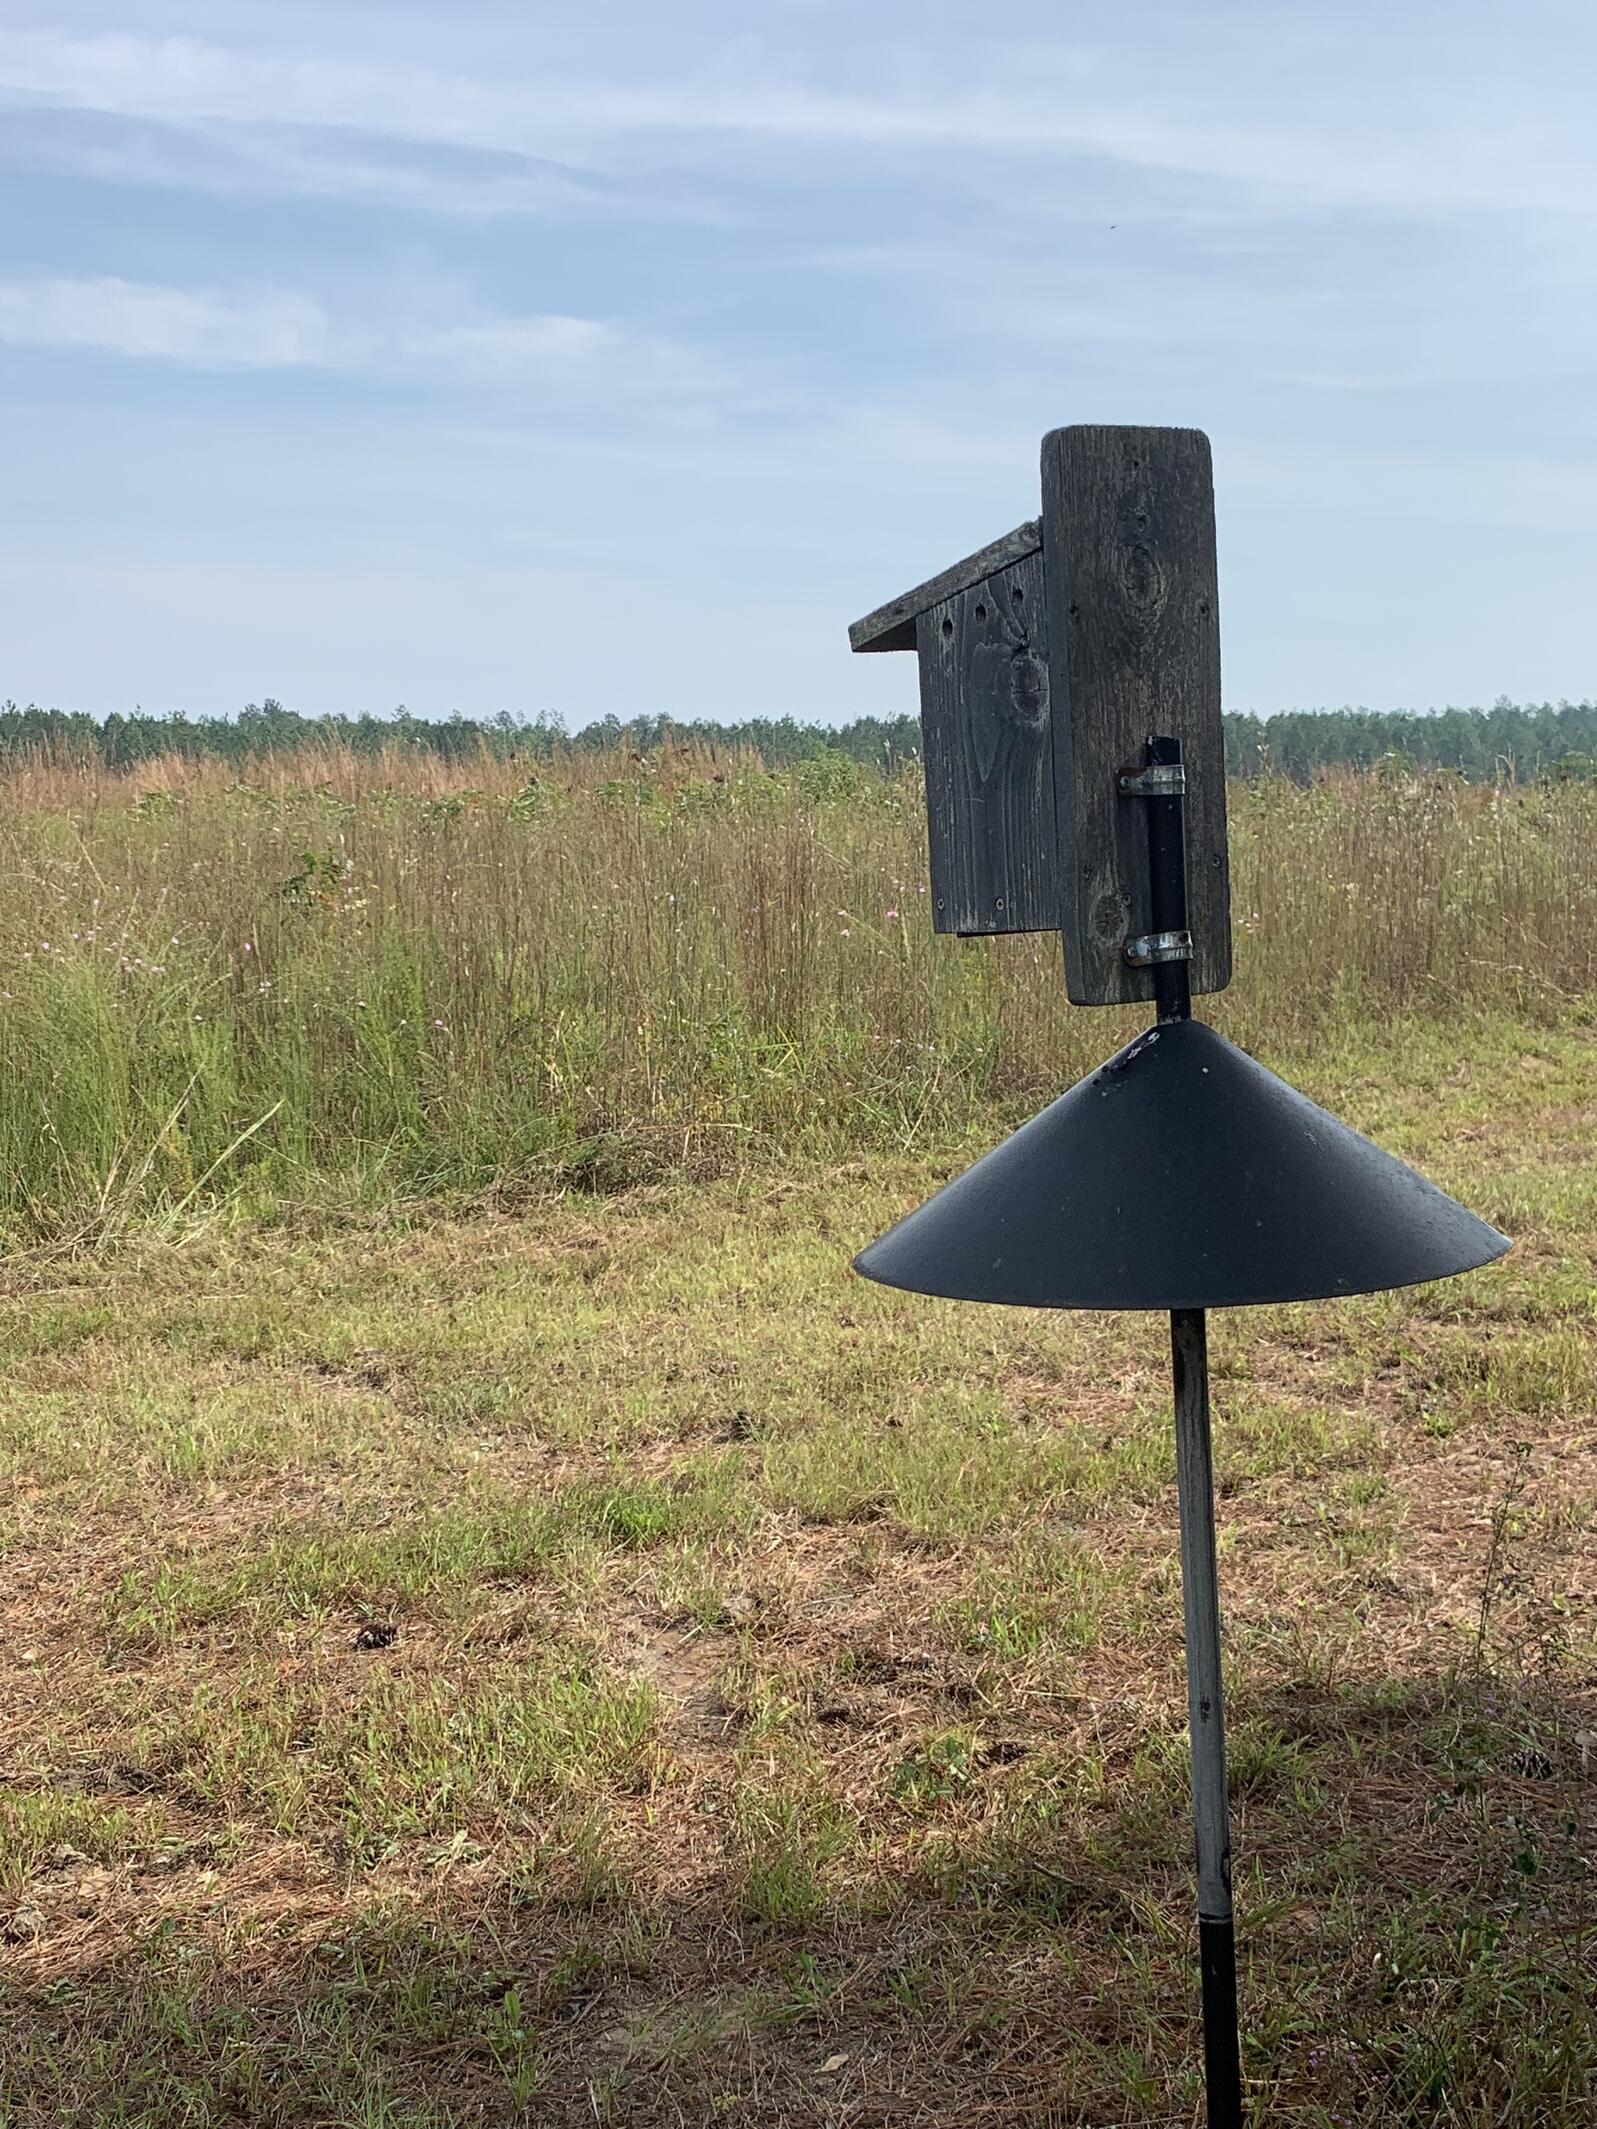 A weathered wooden bluebird house sits on a metal pole with a cone baffle looking out over a restored grassland meadow on a summer day.